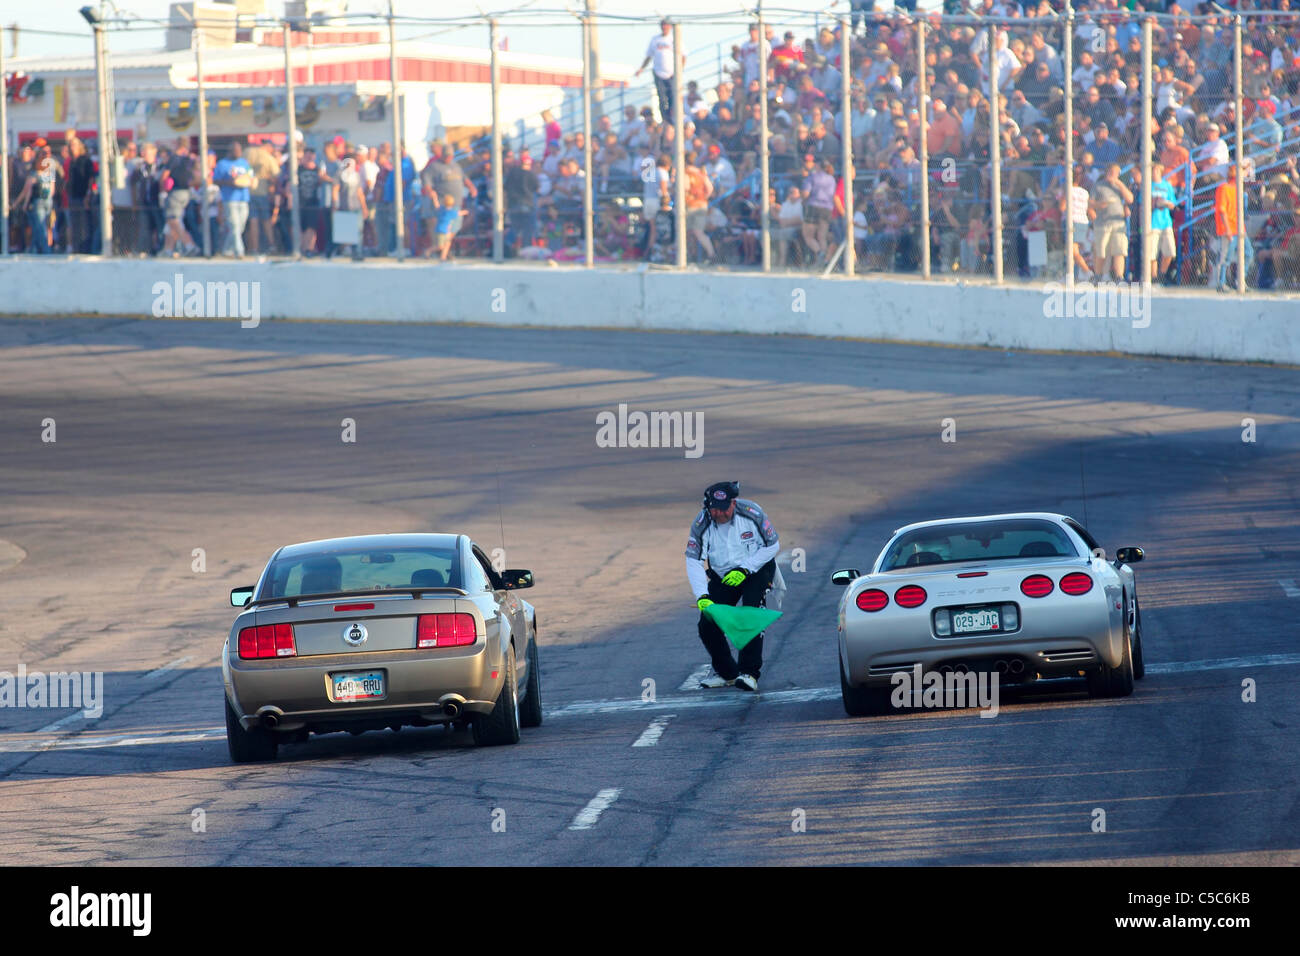 Denver, Colorado - A Ford Mustang and a Chevrolet Corvette are signaled to start the private citizen drag race Stock Photo